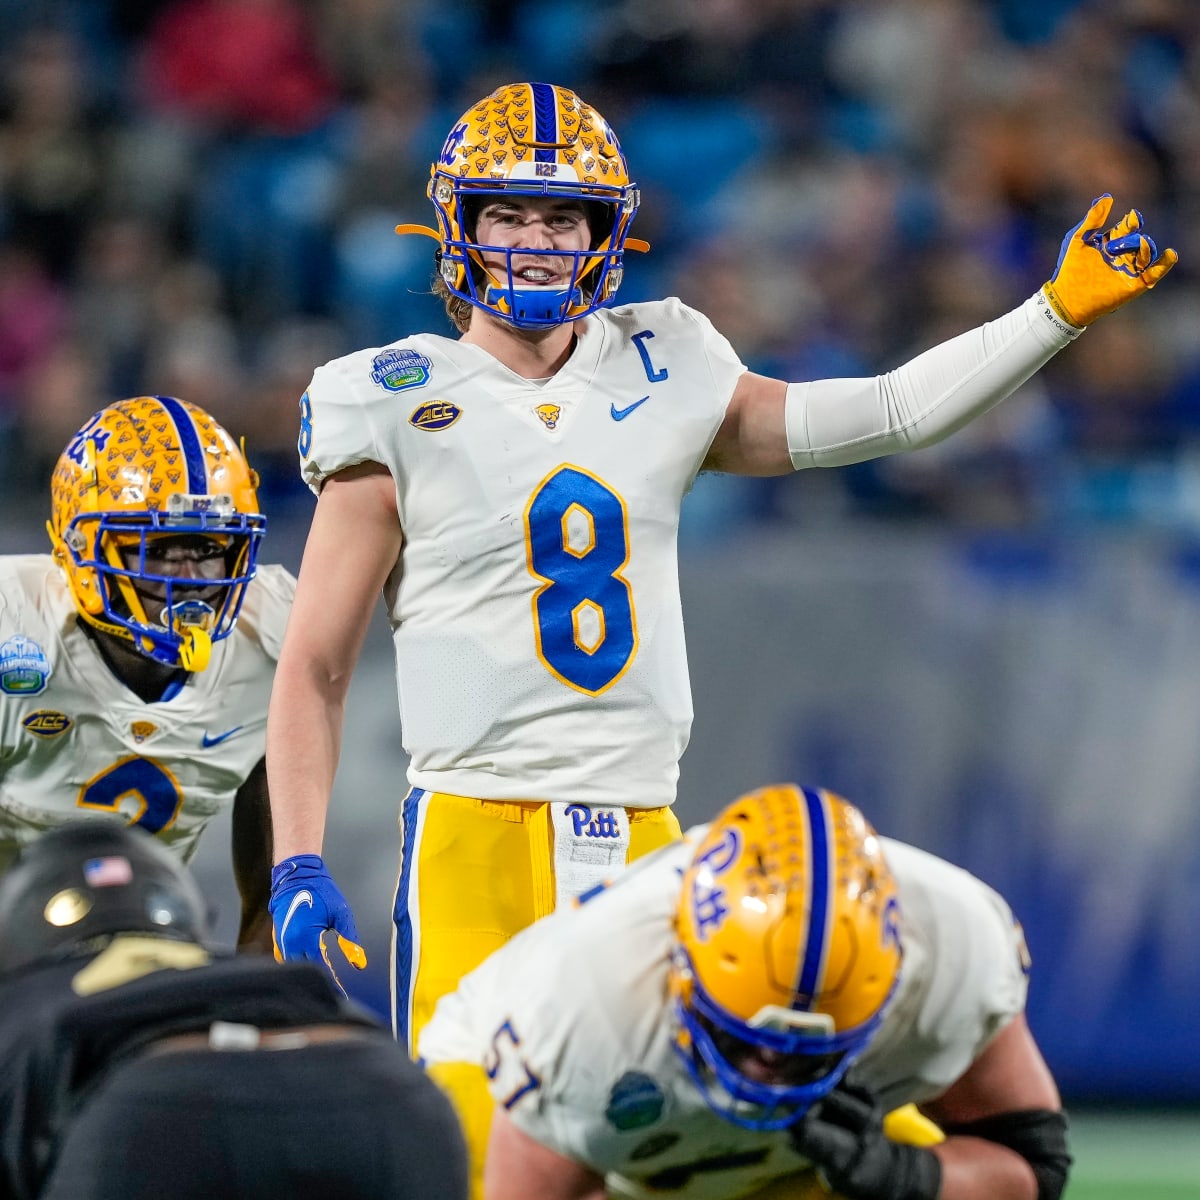 2022 NFL Mock Draft: Projected trades shake up first round